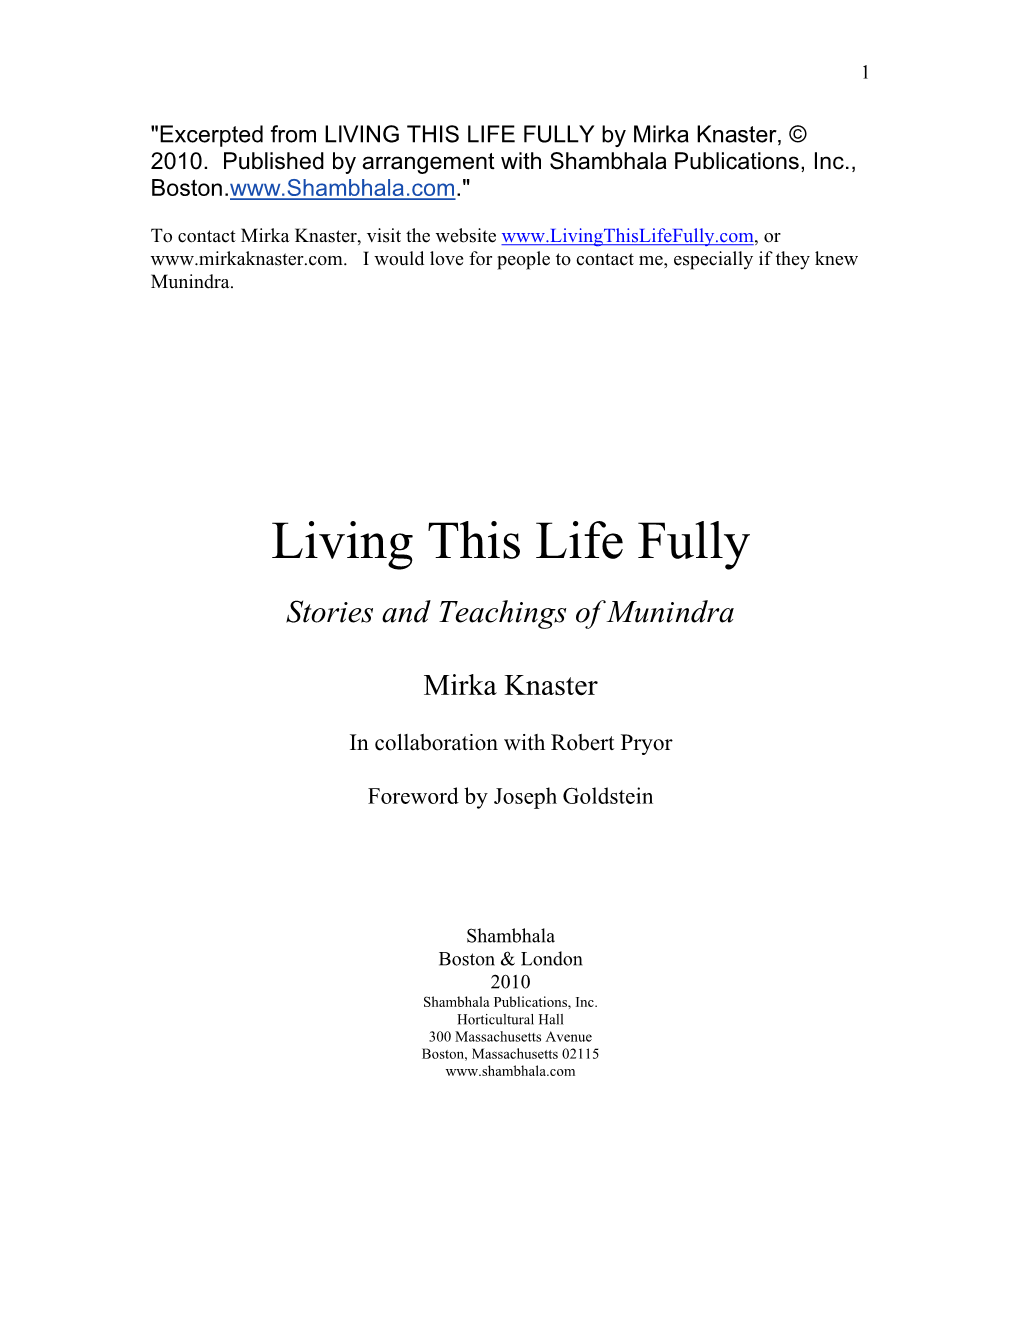 Living This Life Fully: Stories and Teachings of Munindra Is Both an Insightful Introduction to and a Wonderful Remembrance of This Unusual Teacher